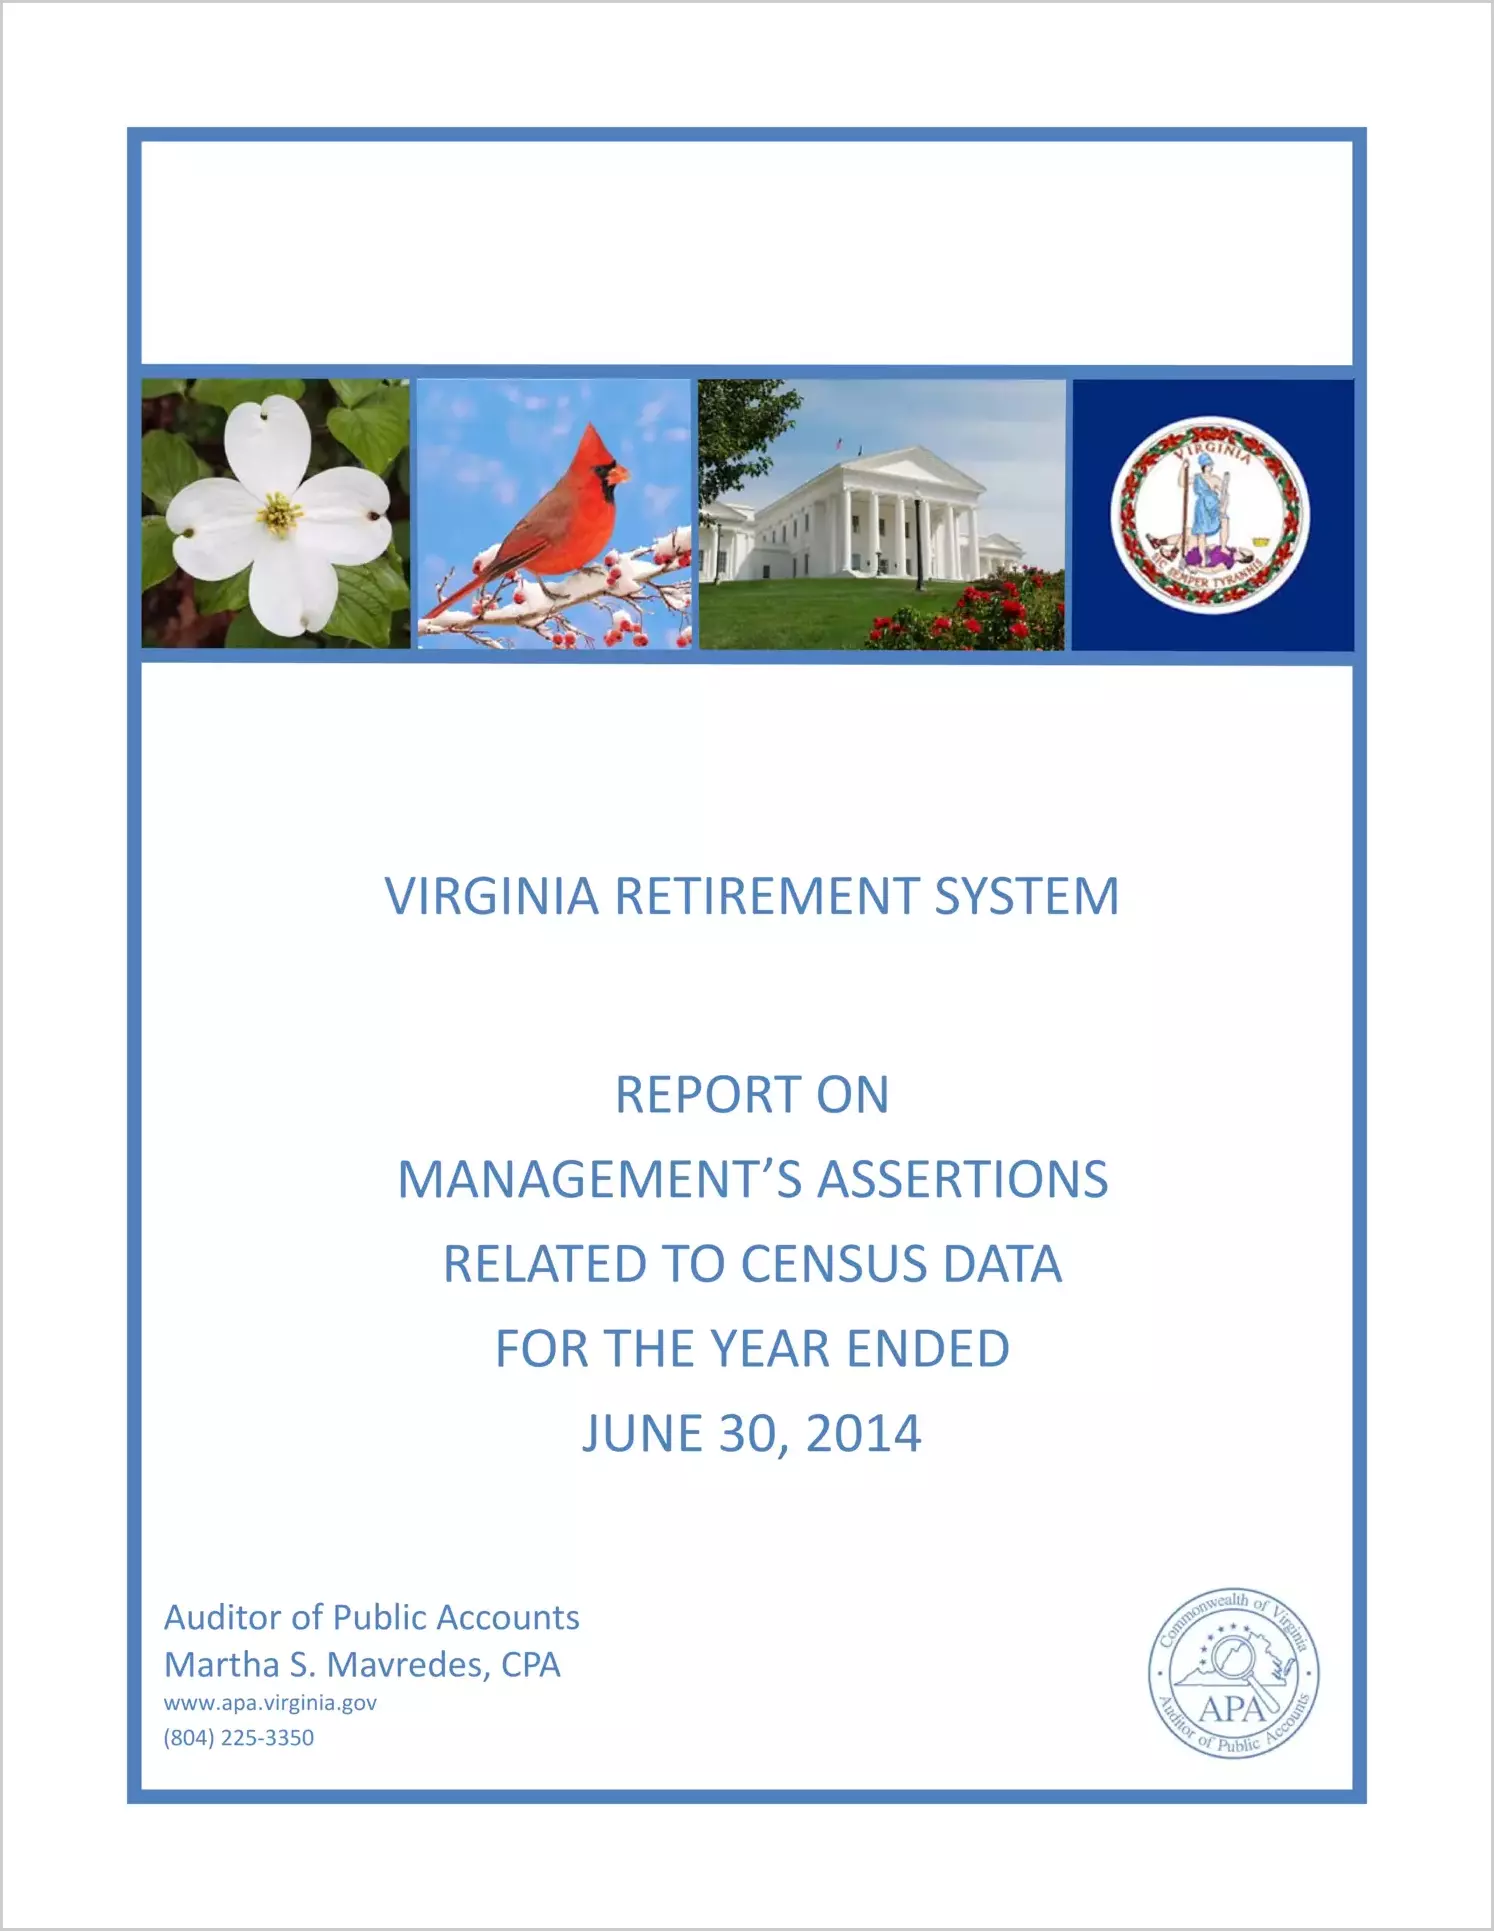 VRS Report on Management's Assertions Related to Census Data for the year ended June 30, 2014